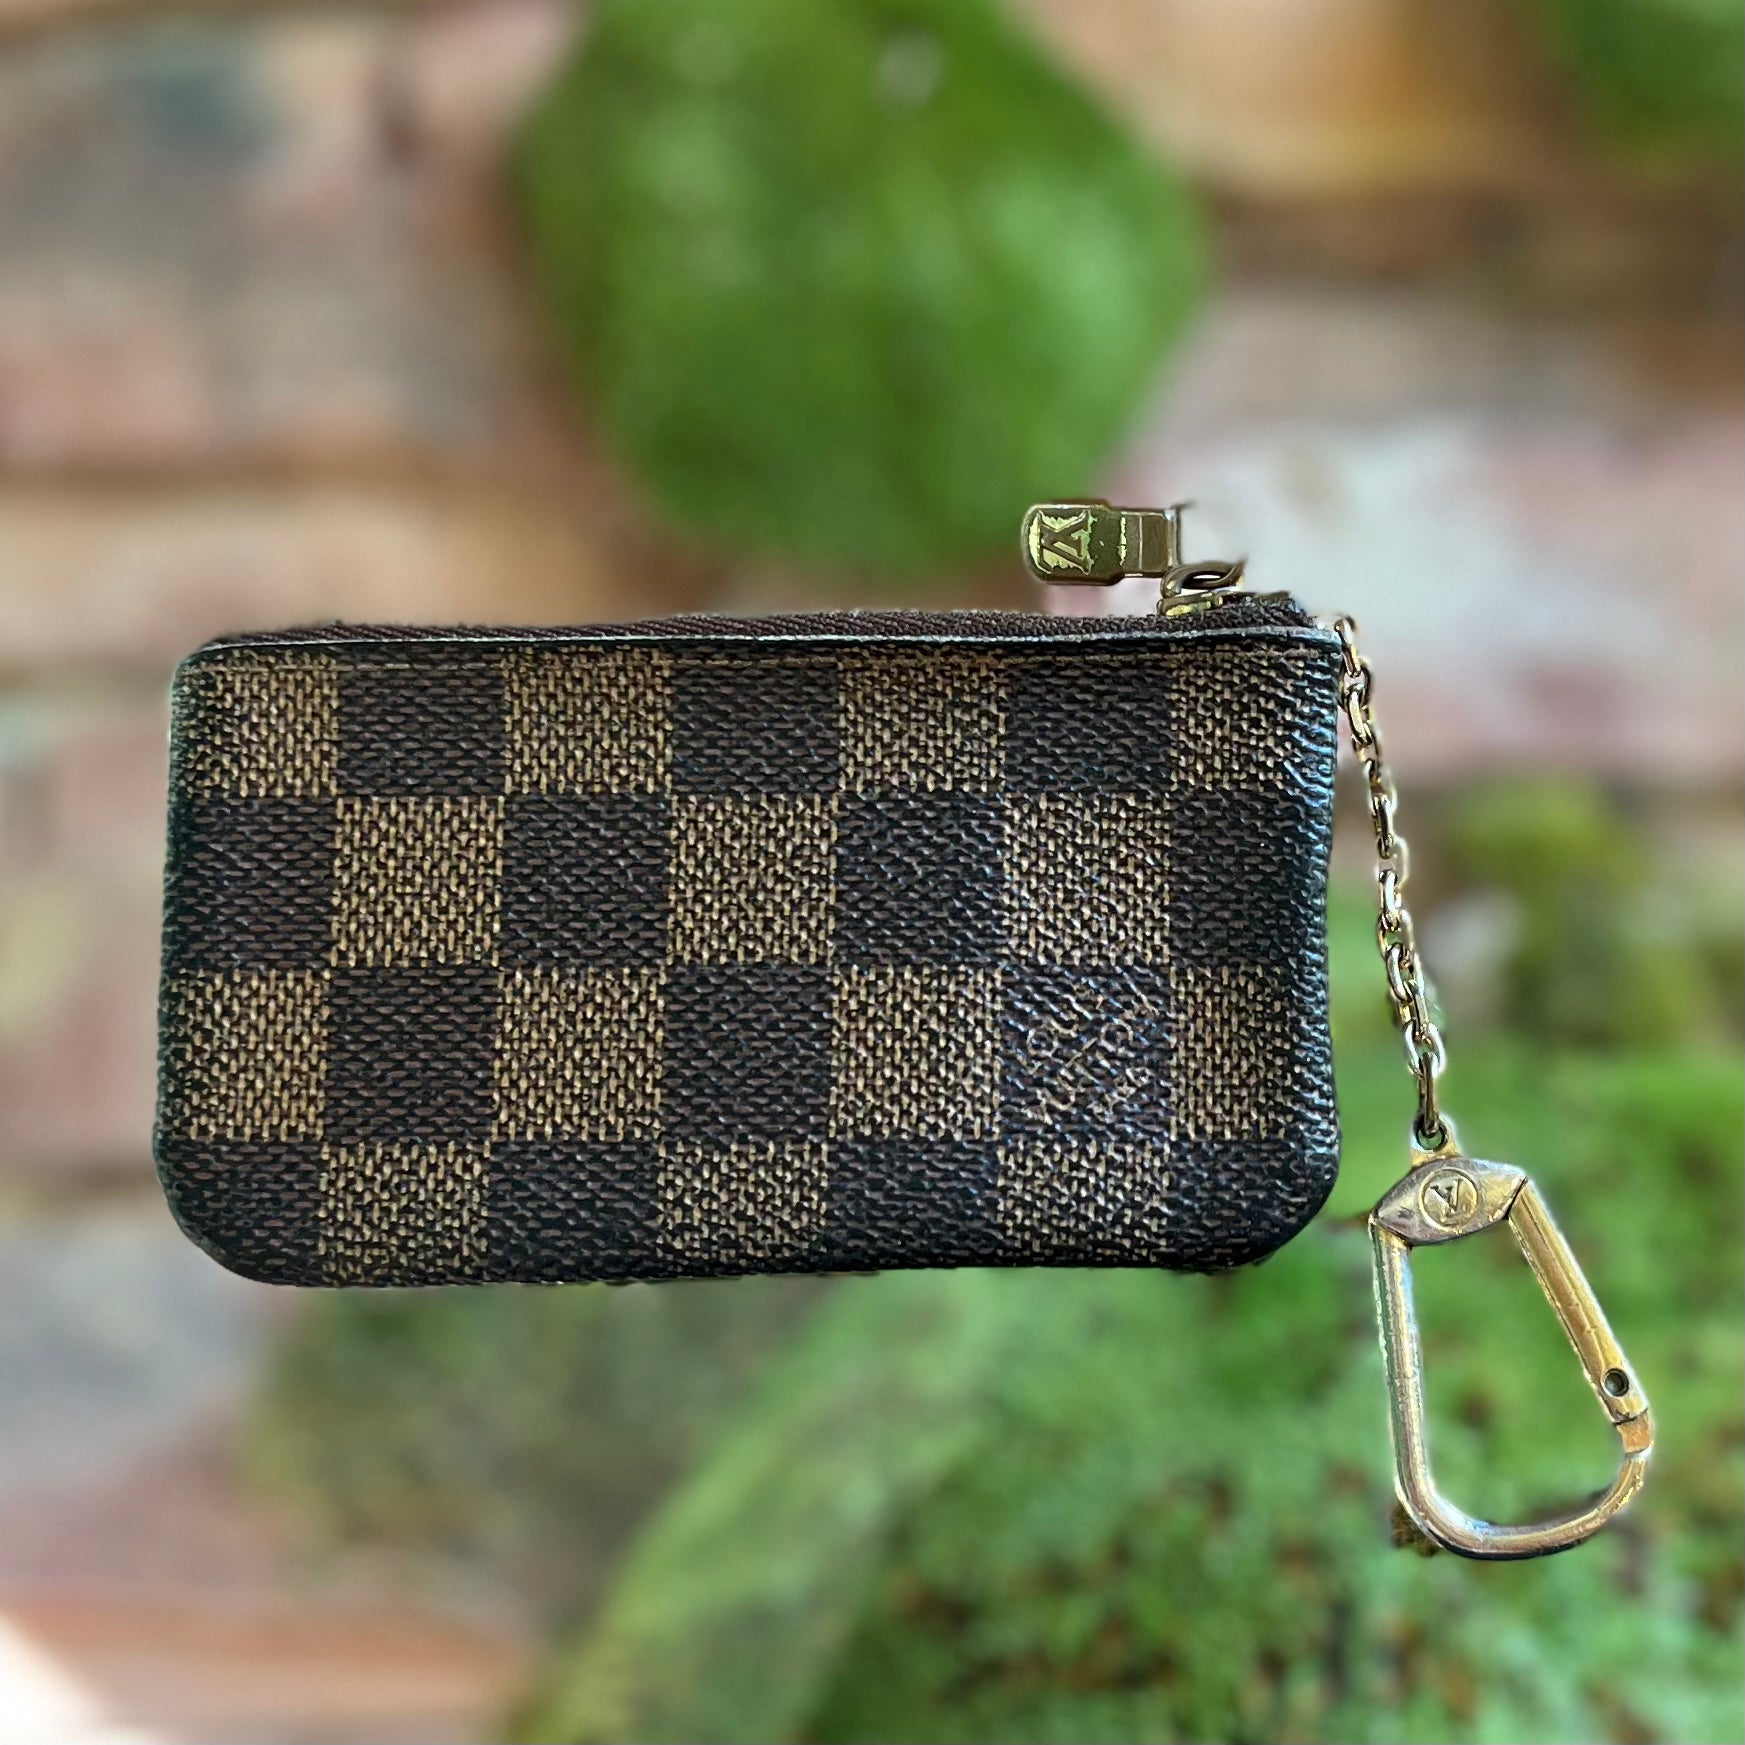 Louis Vuitton Key Pouch Damier Ebene in Coated Canvas with Gold